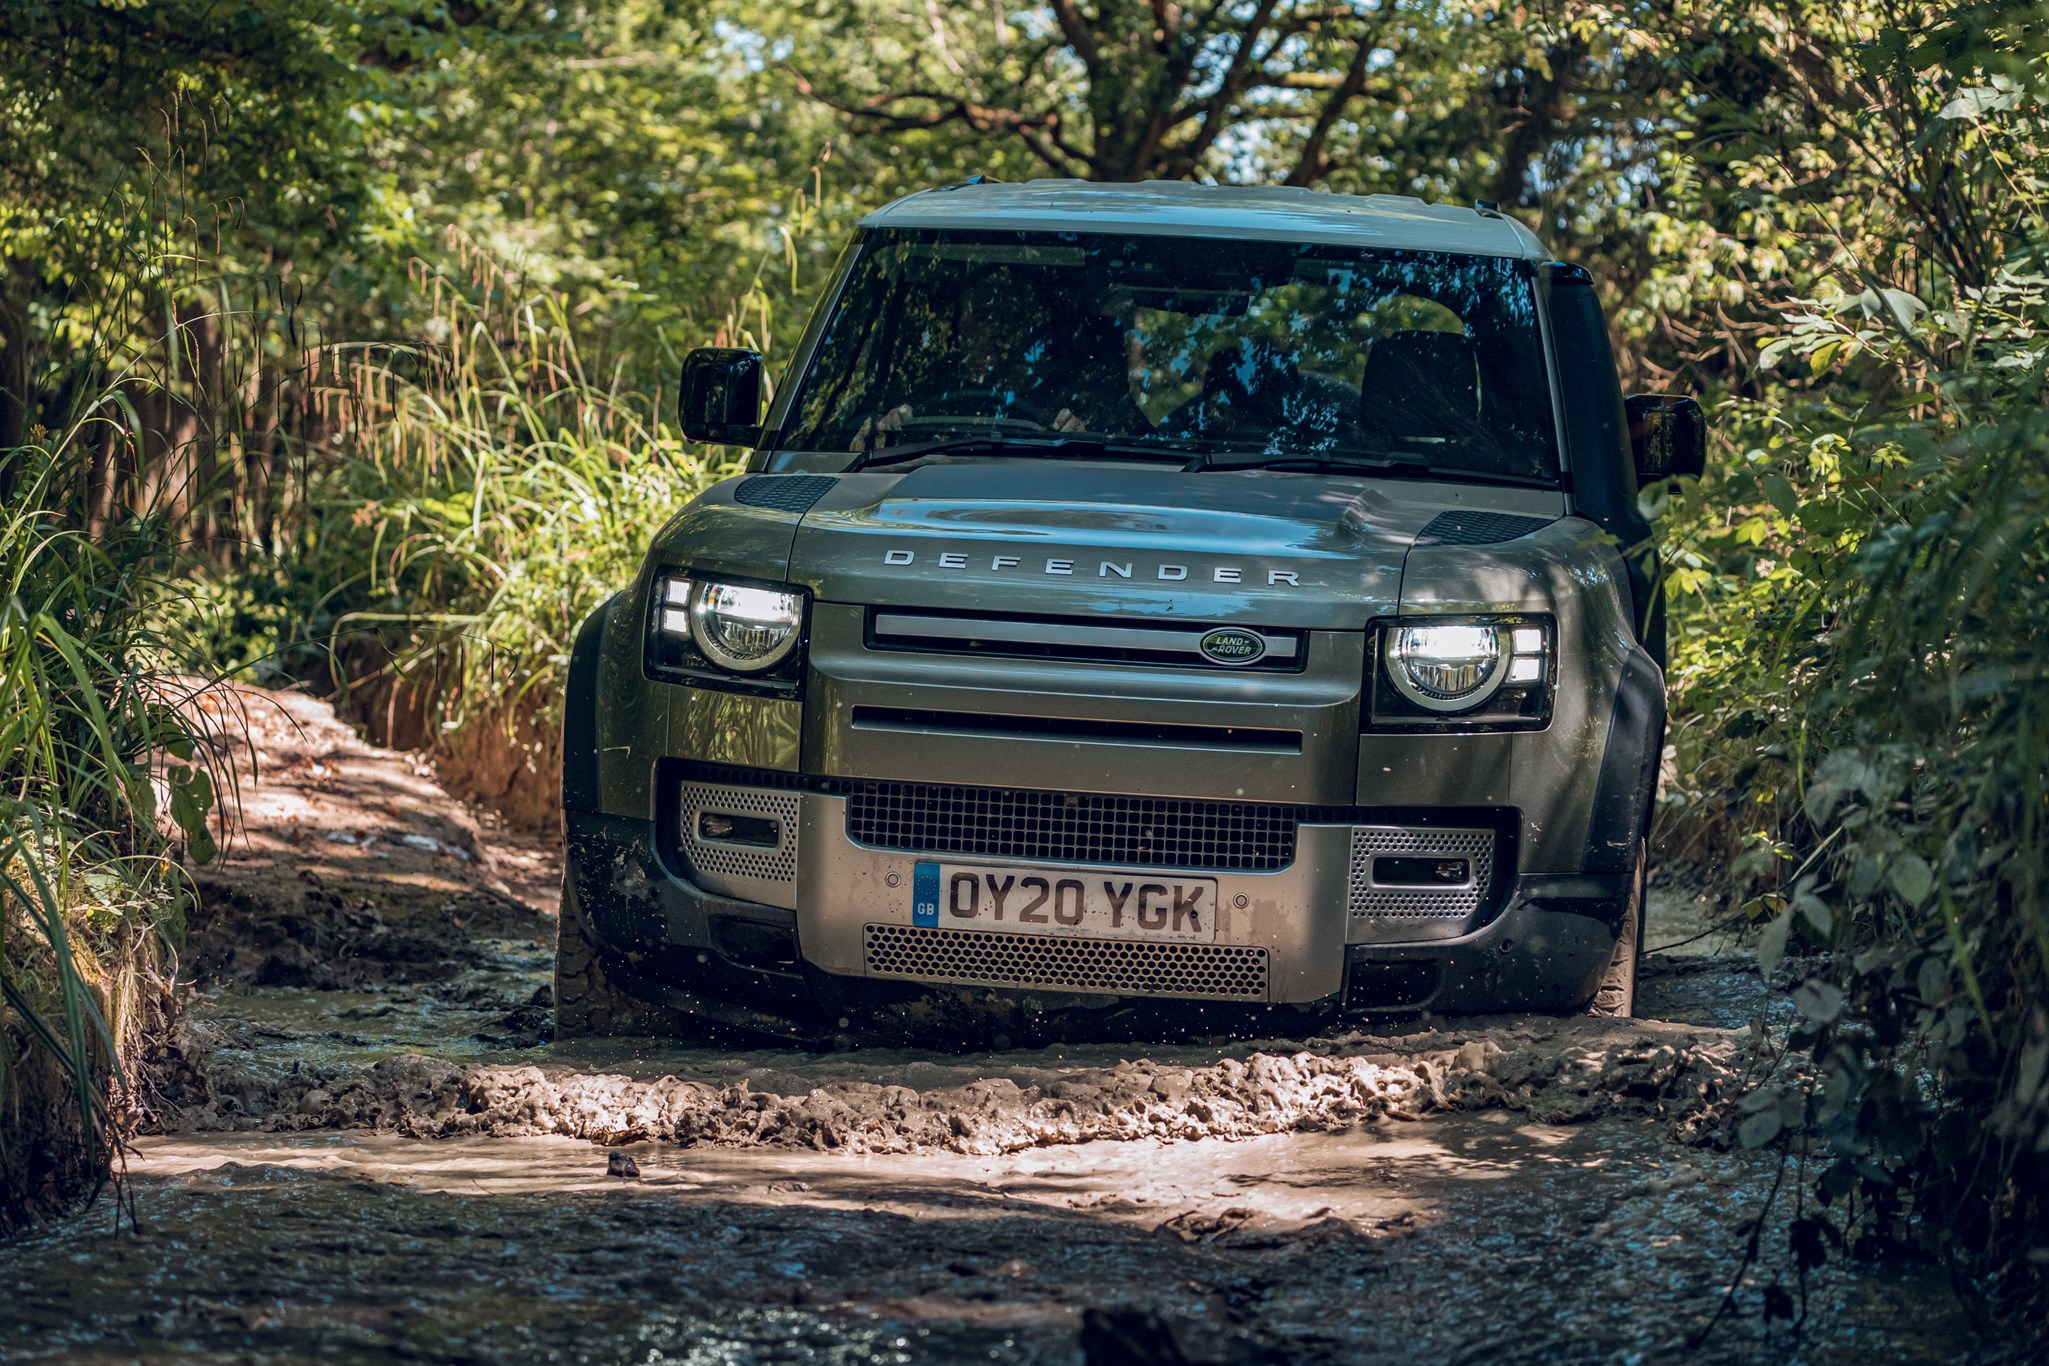 Land Rover Defender (2020) off-road view, driving